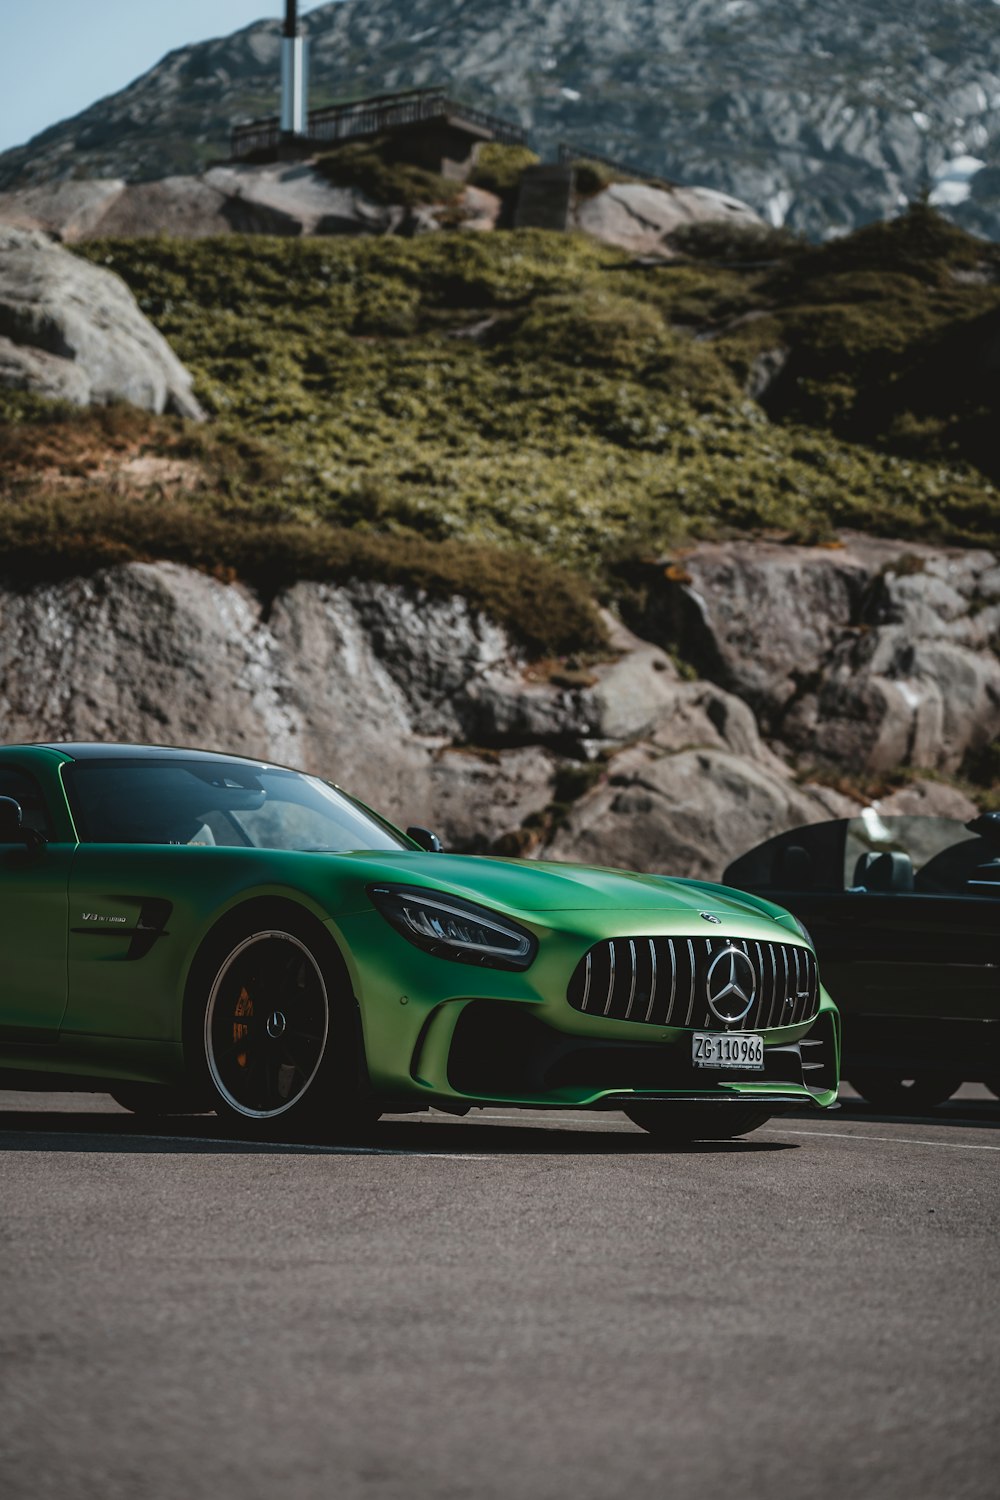 a green sports car parked next to a black sports car